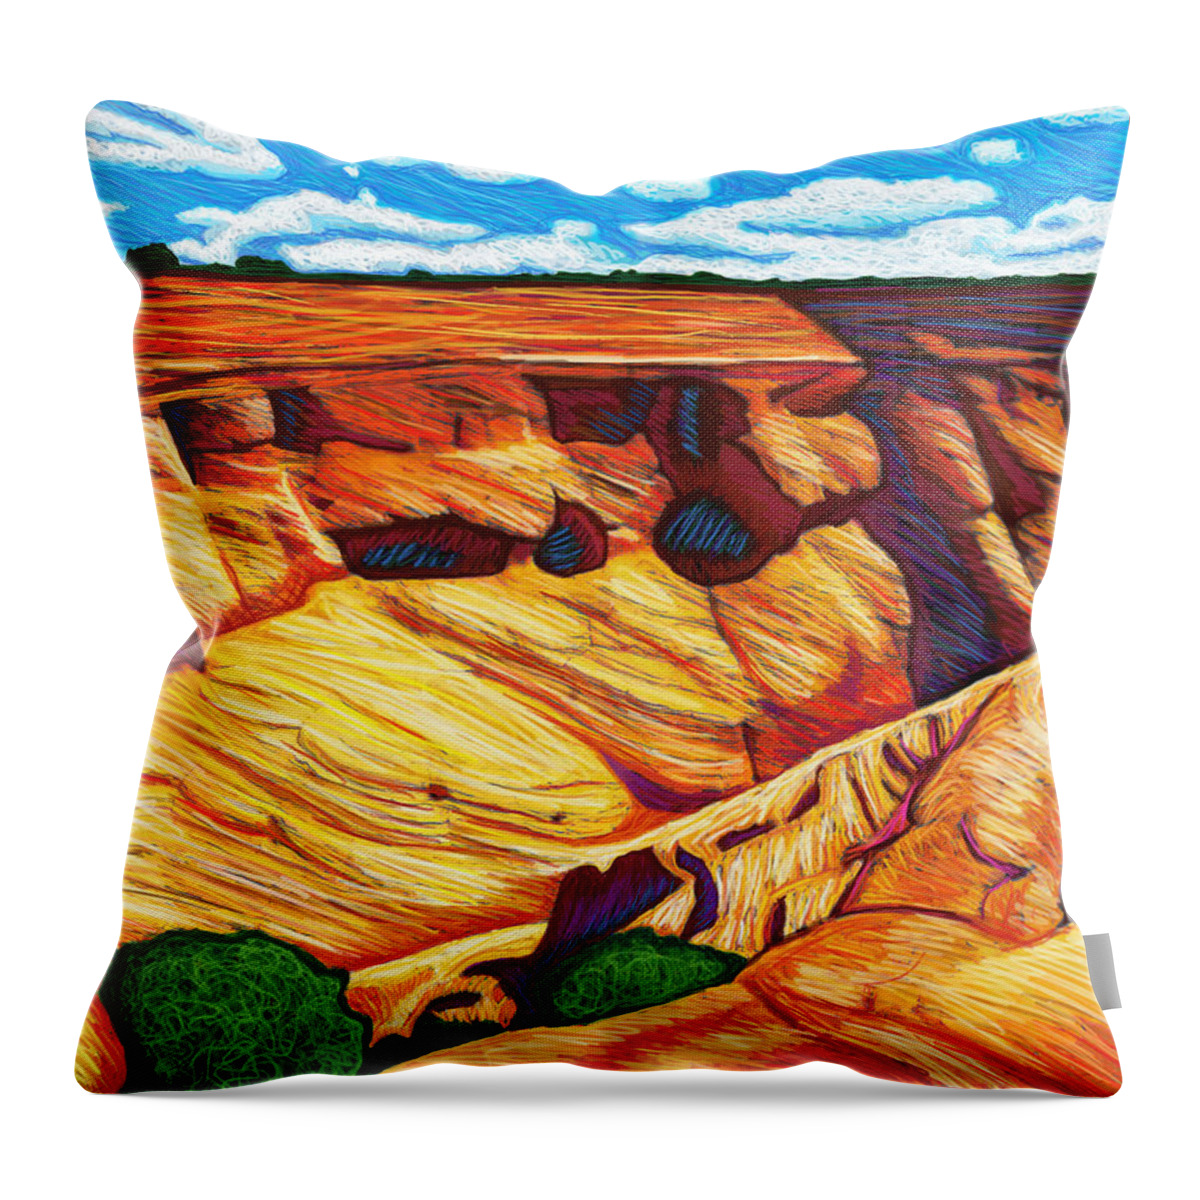 Arizona Throw Pillow featuring the digital art A Sunny Day At Canyon de Chelly by Rod Whyte